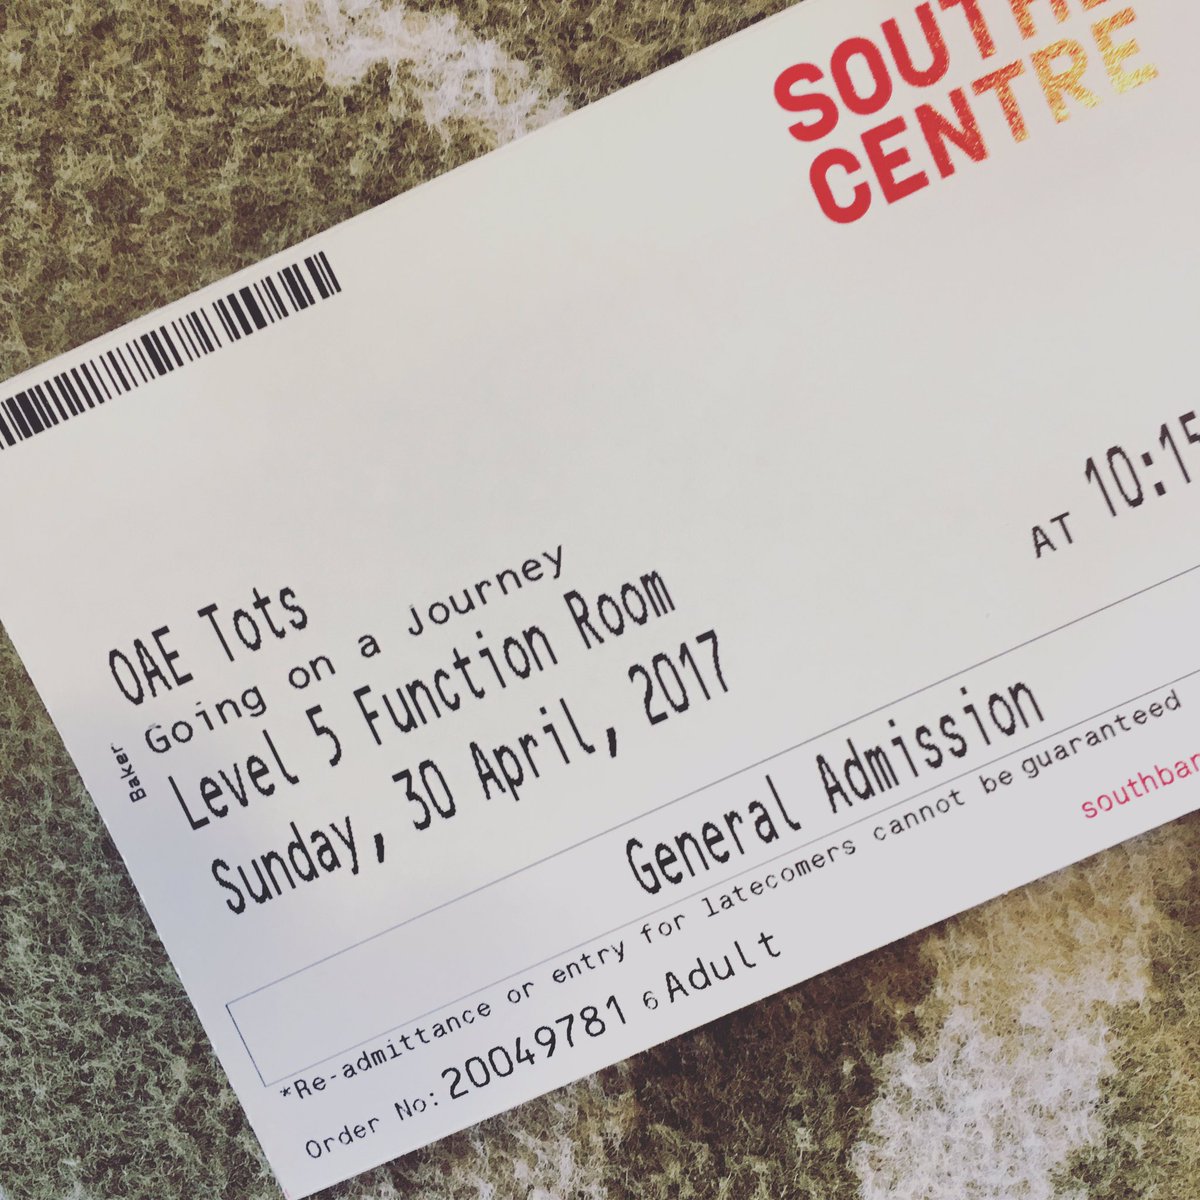 Toddler & I spent the morning with OAE Tots @southbankcentre and it was lovely. Thanks for the music! #oaetots #goingonajourney